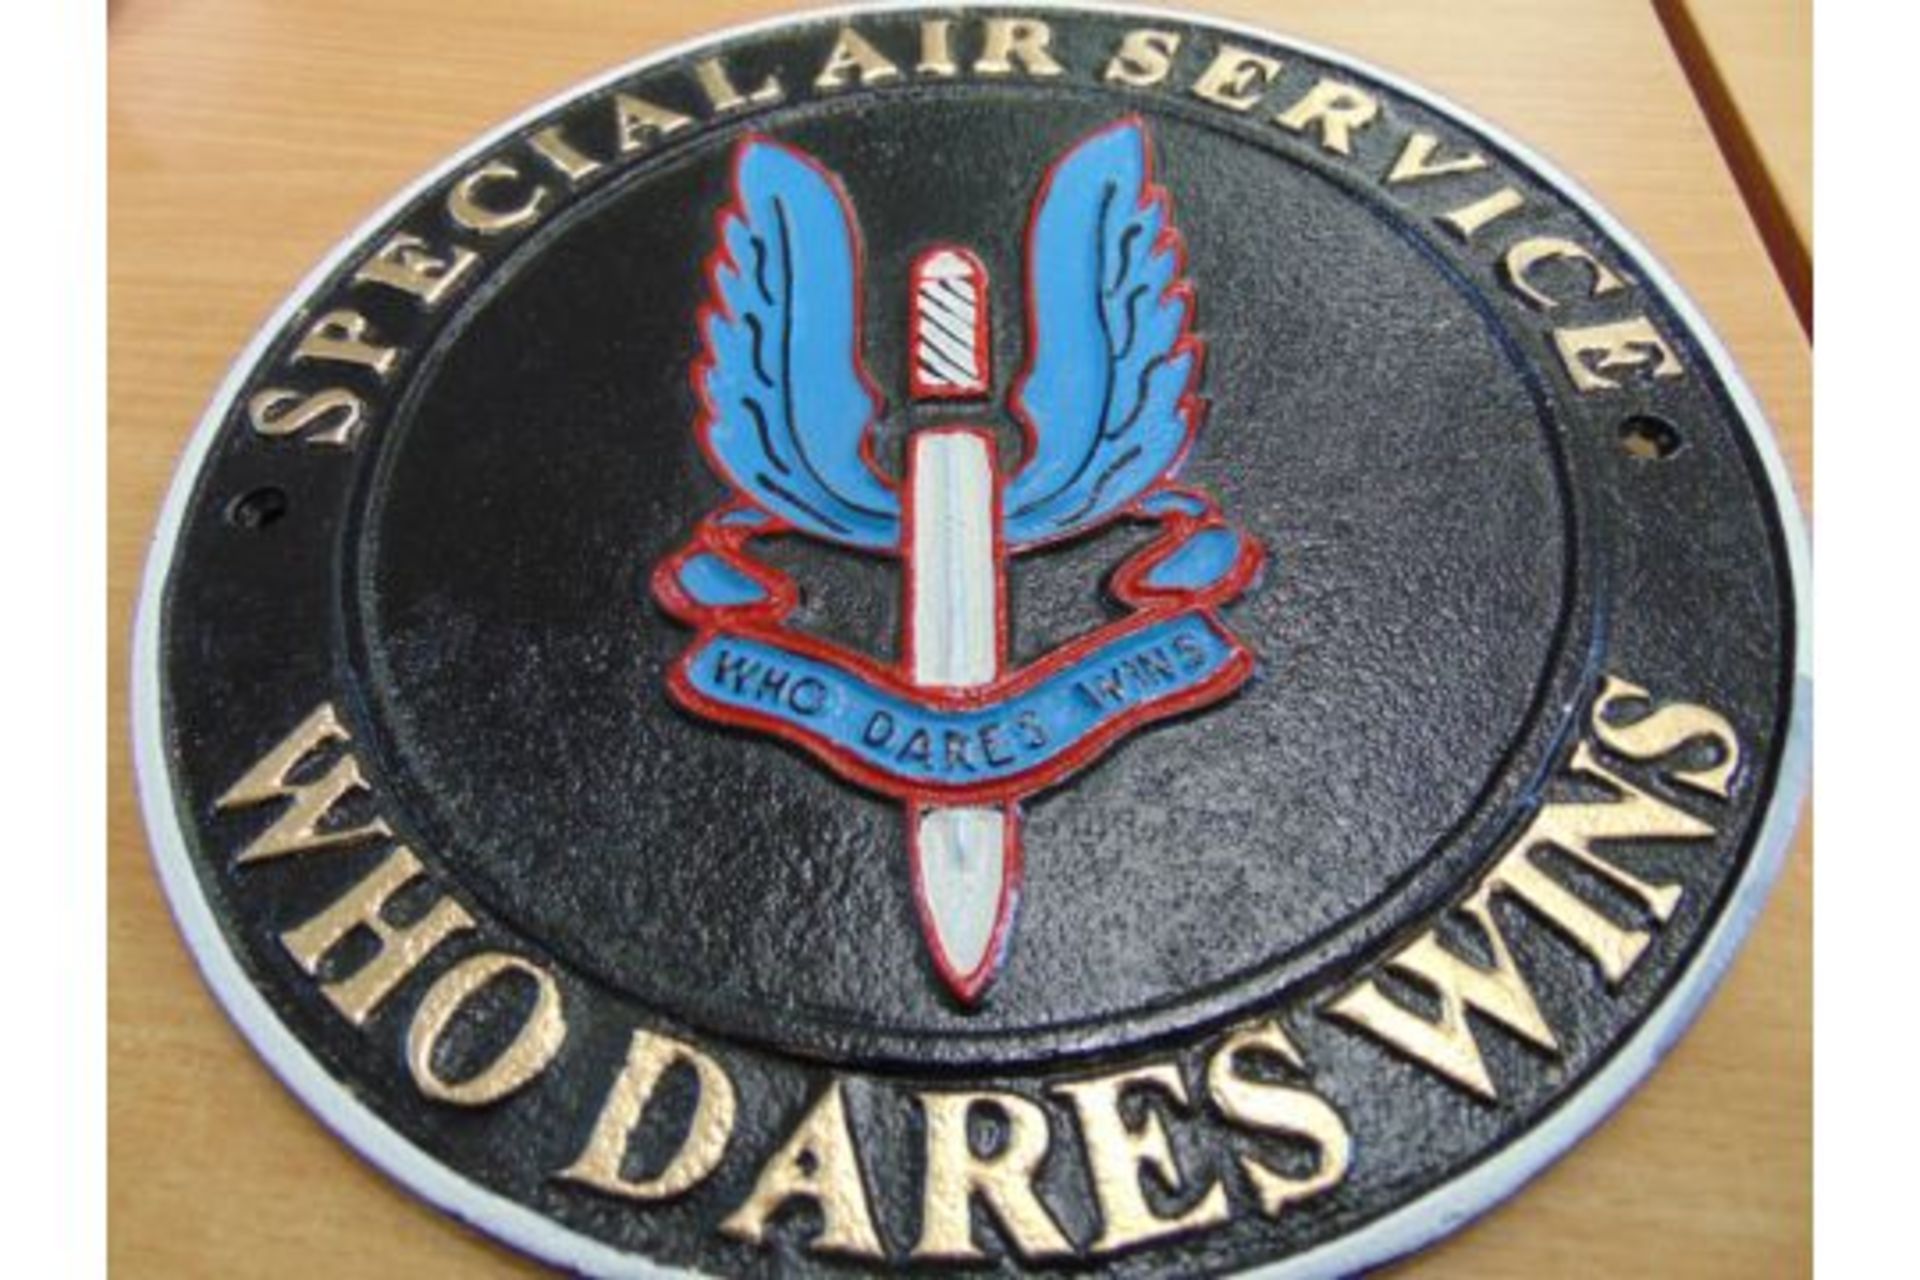 SAS WHO DARES WIN CAST IRON HAND PAINTED WALL PLAQUE 25CMS DIA - Image 2 of 2